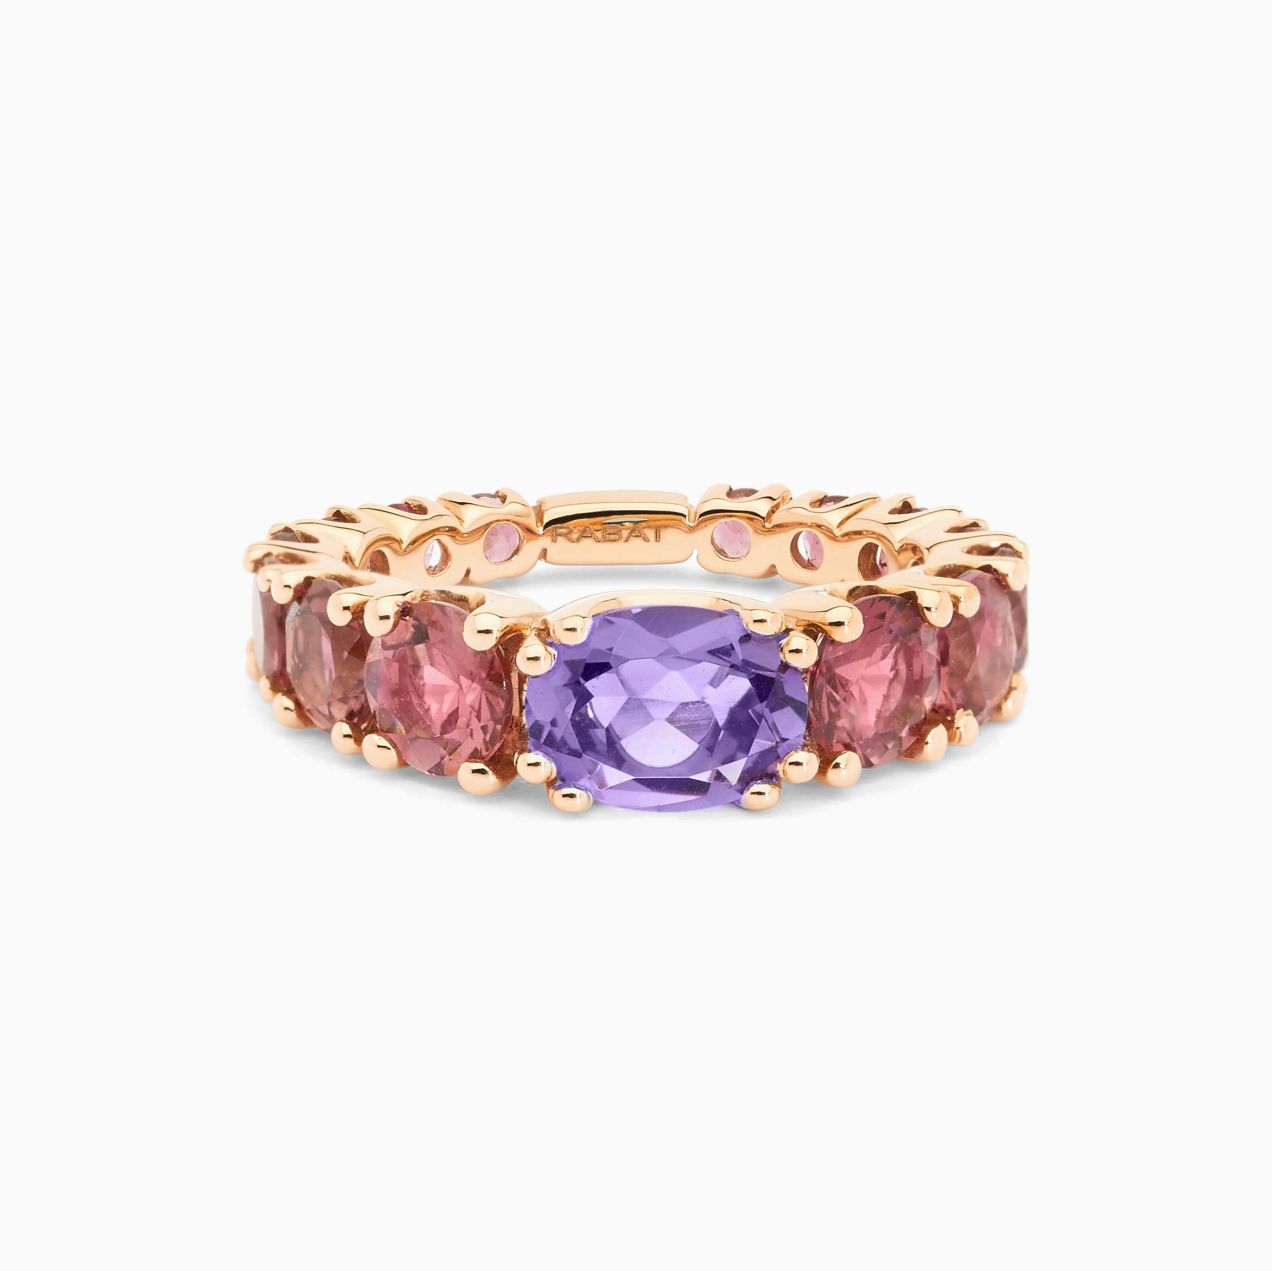 Rose gold with amethyst in the center solitaire ring